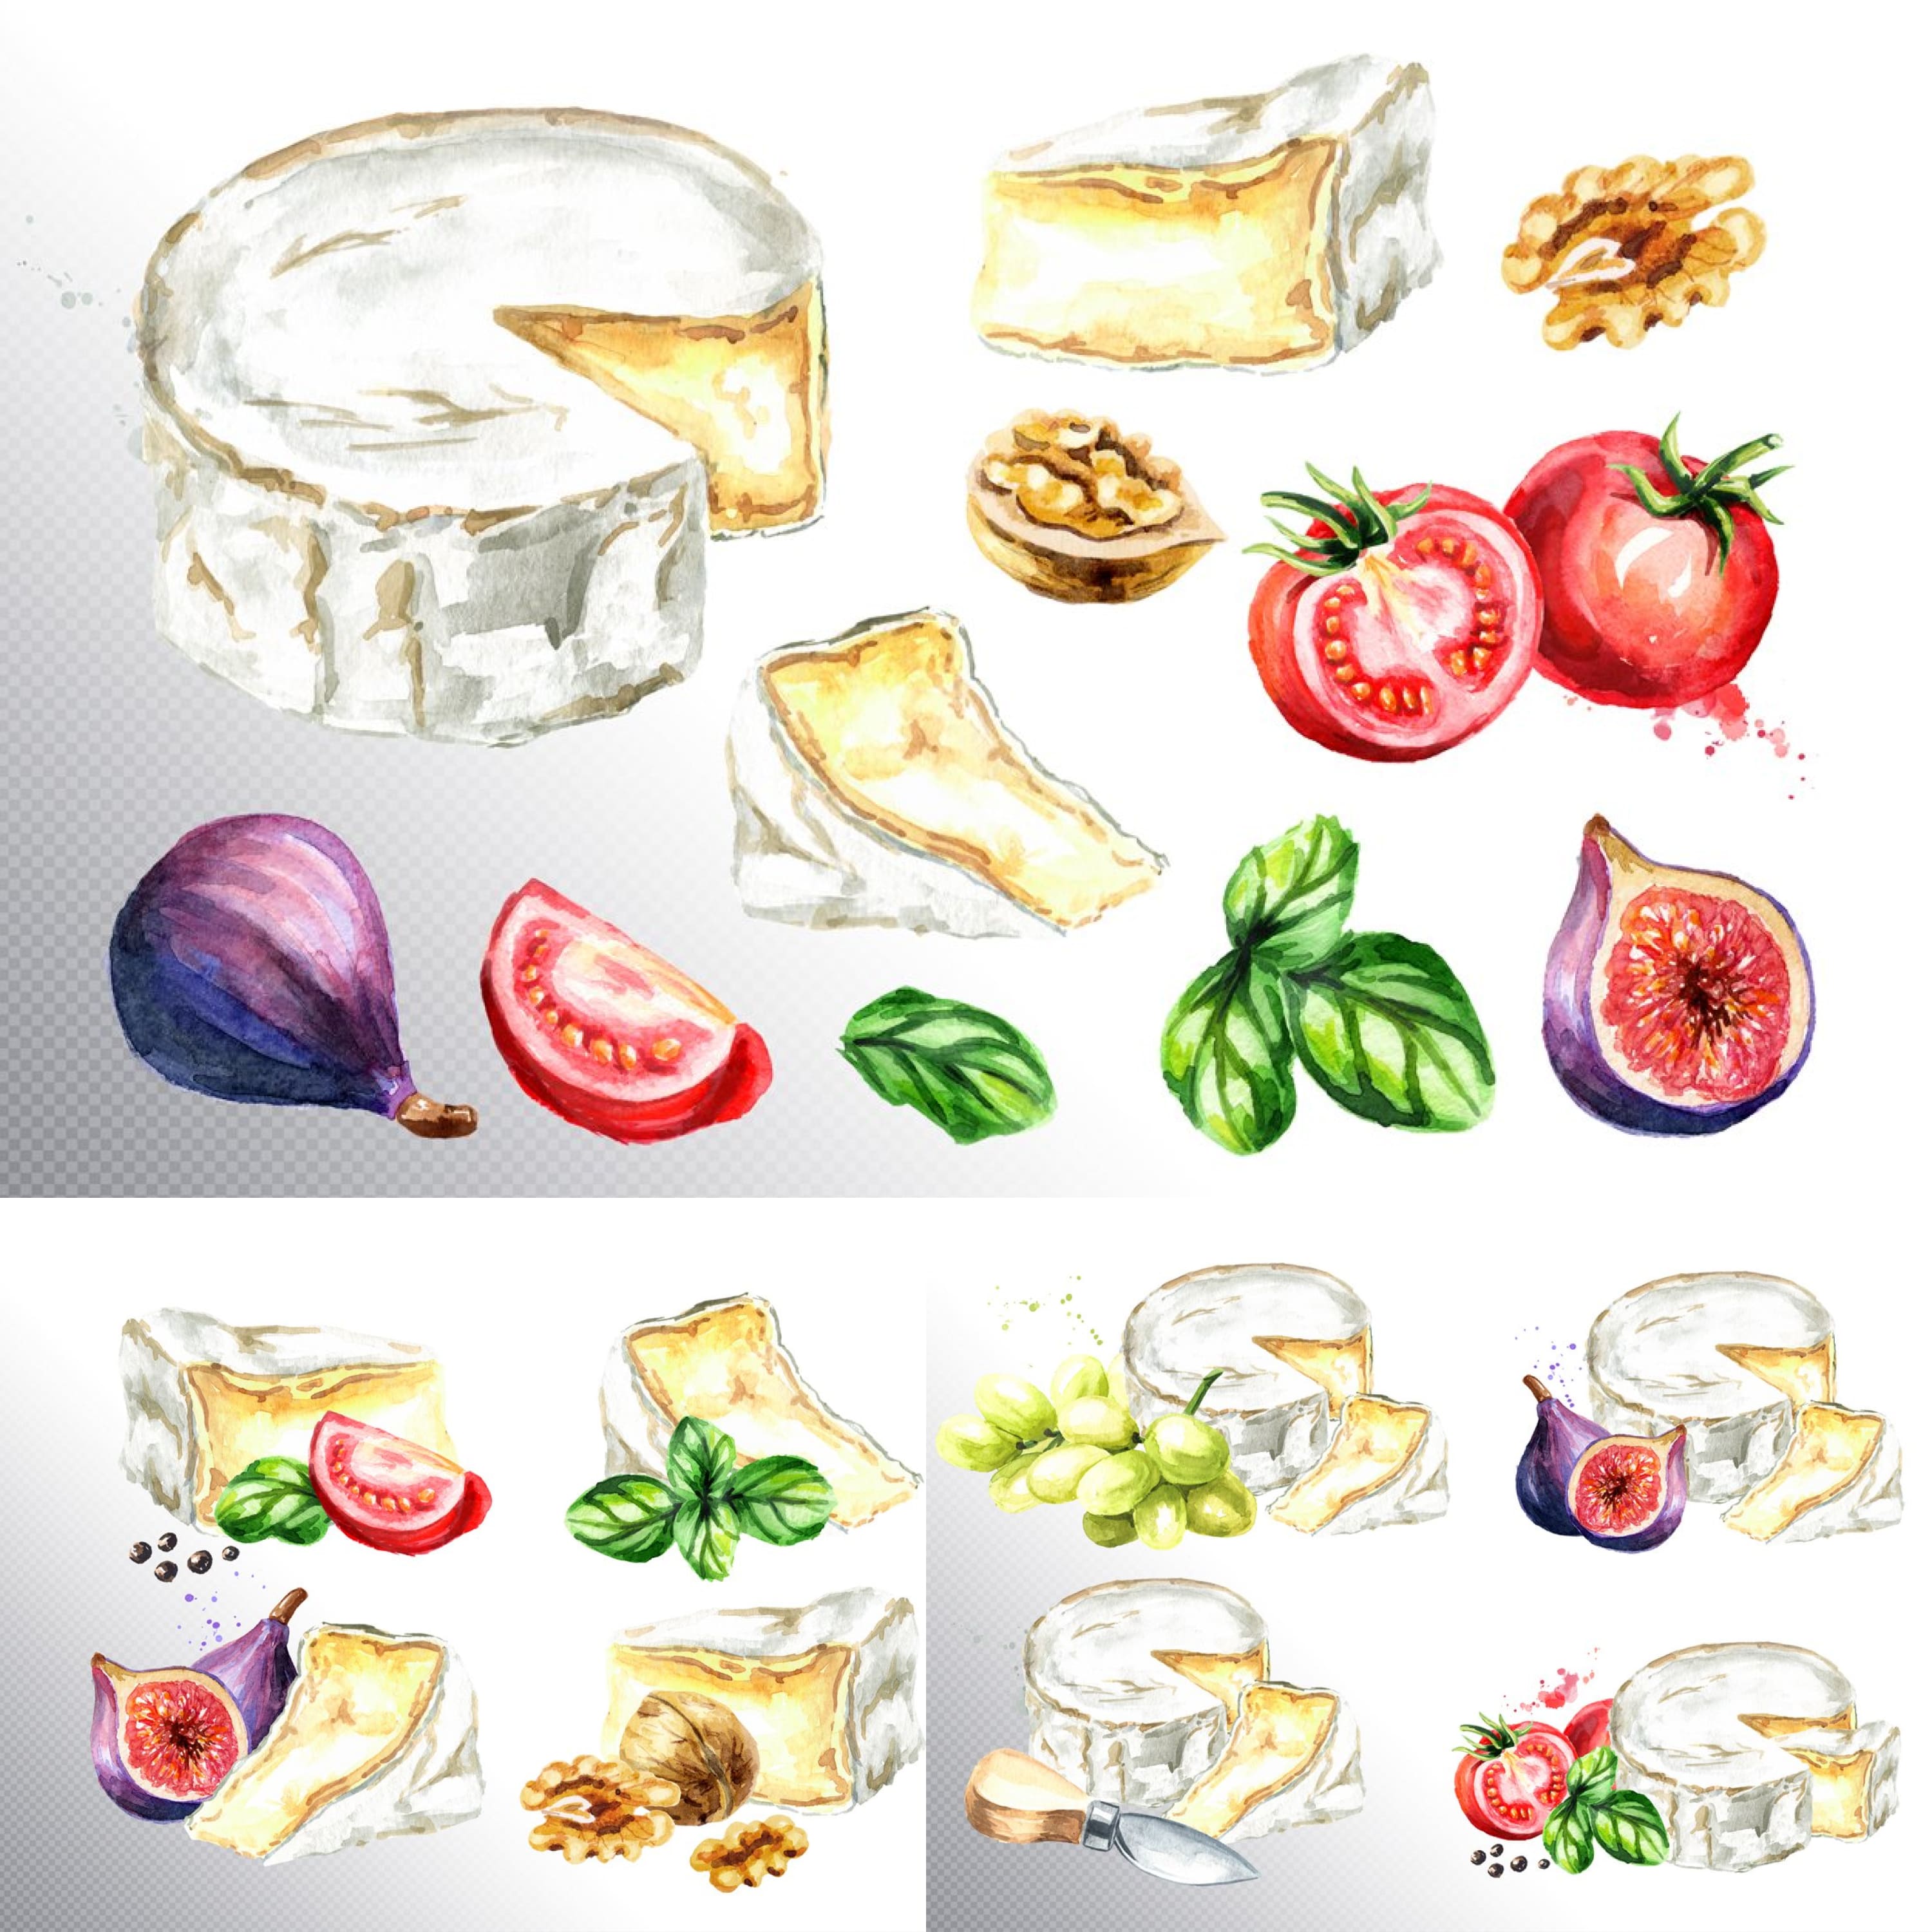 Set of bright images of camembert cheese and tomatoes.